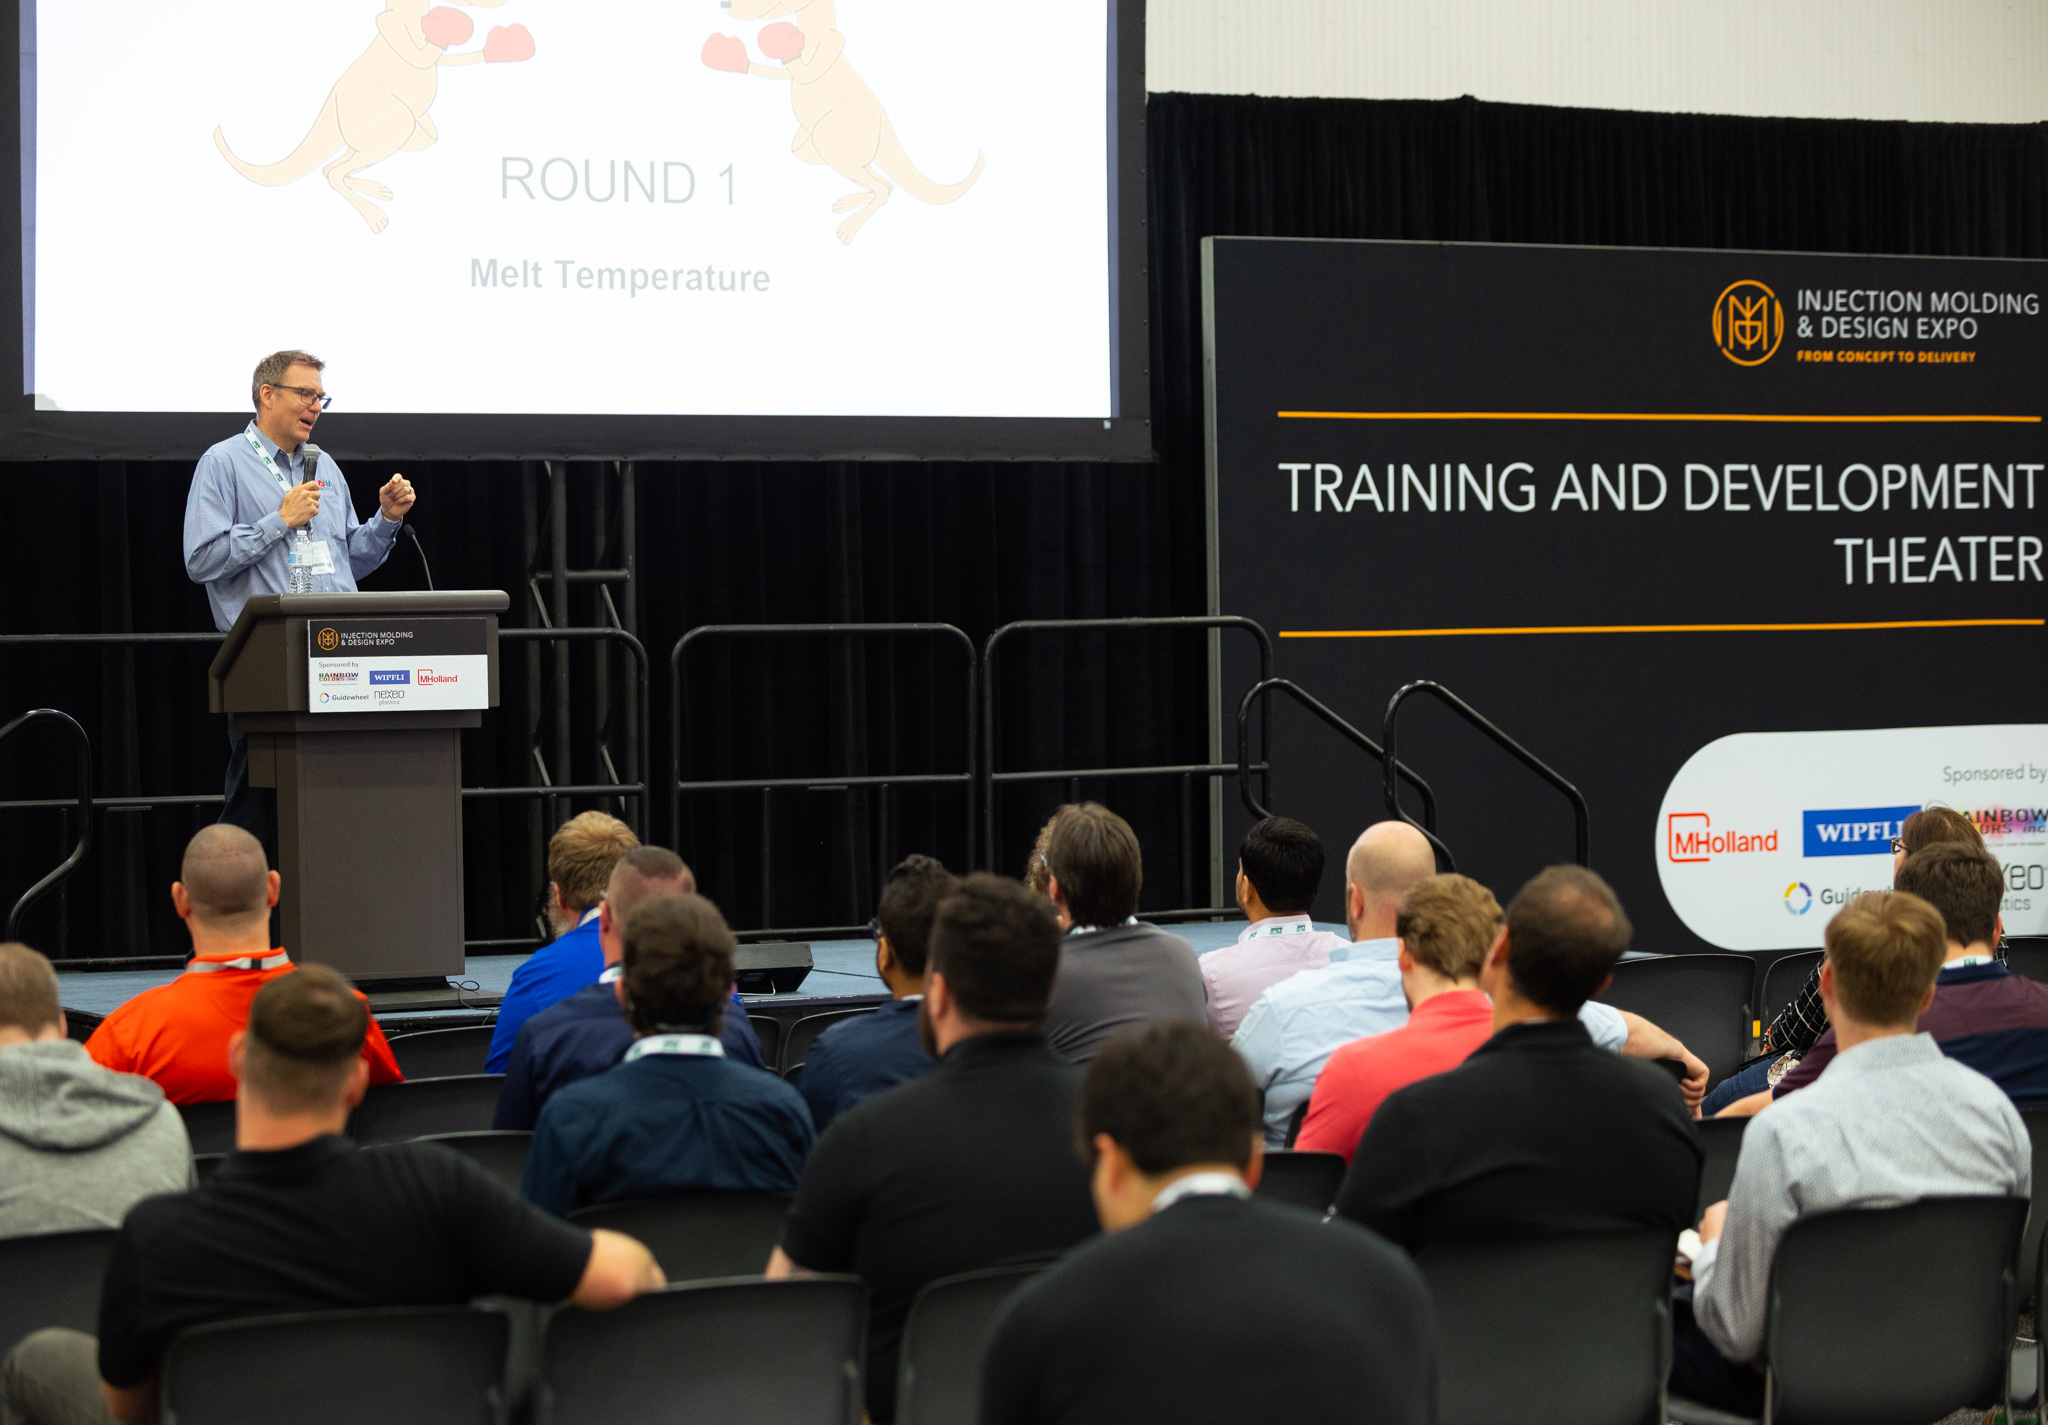 Injection Molding and Design Expo adds free training seminars